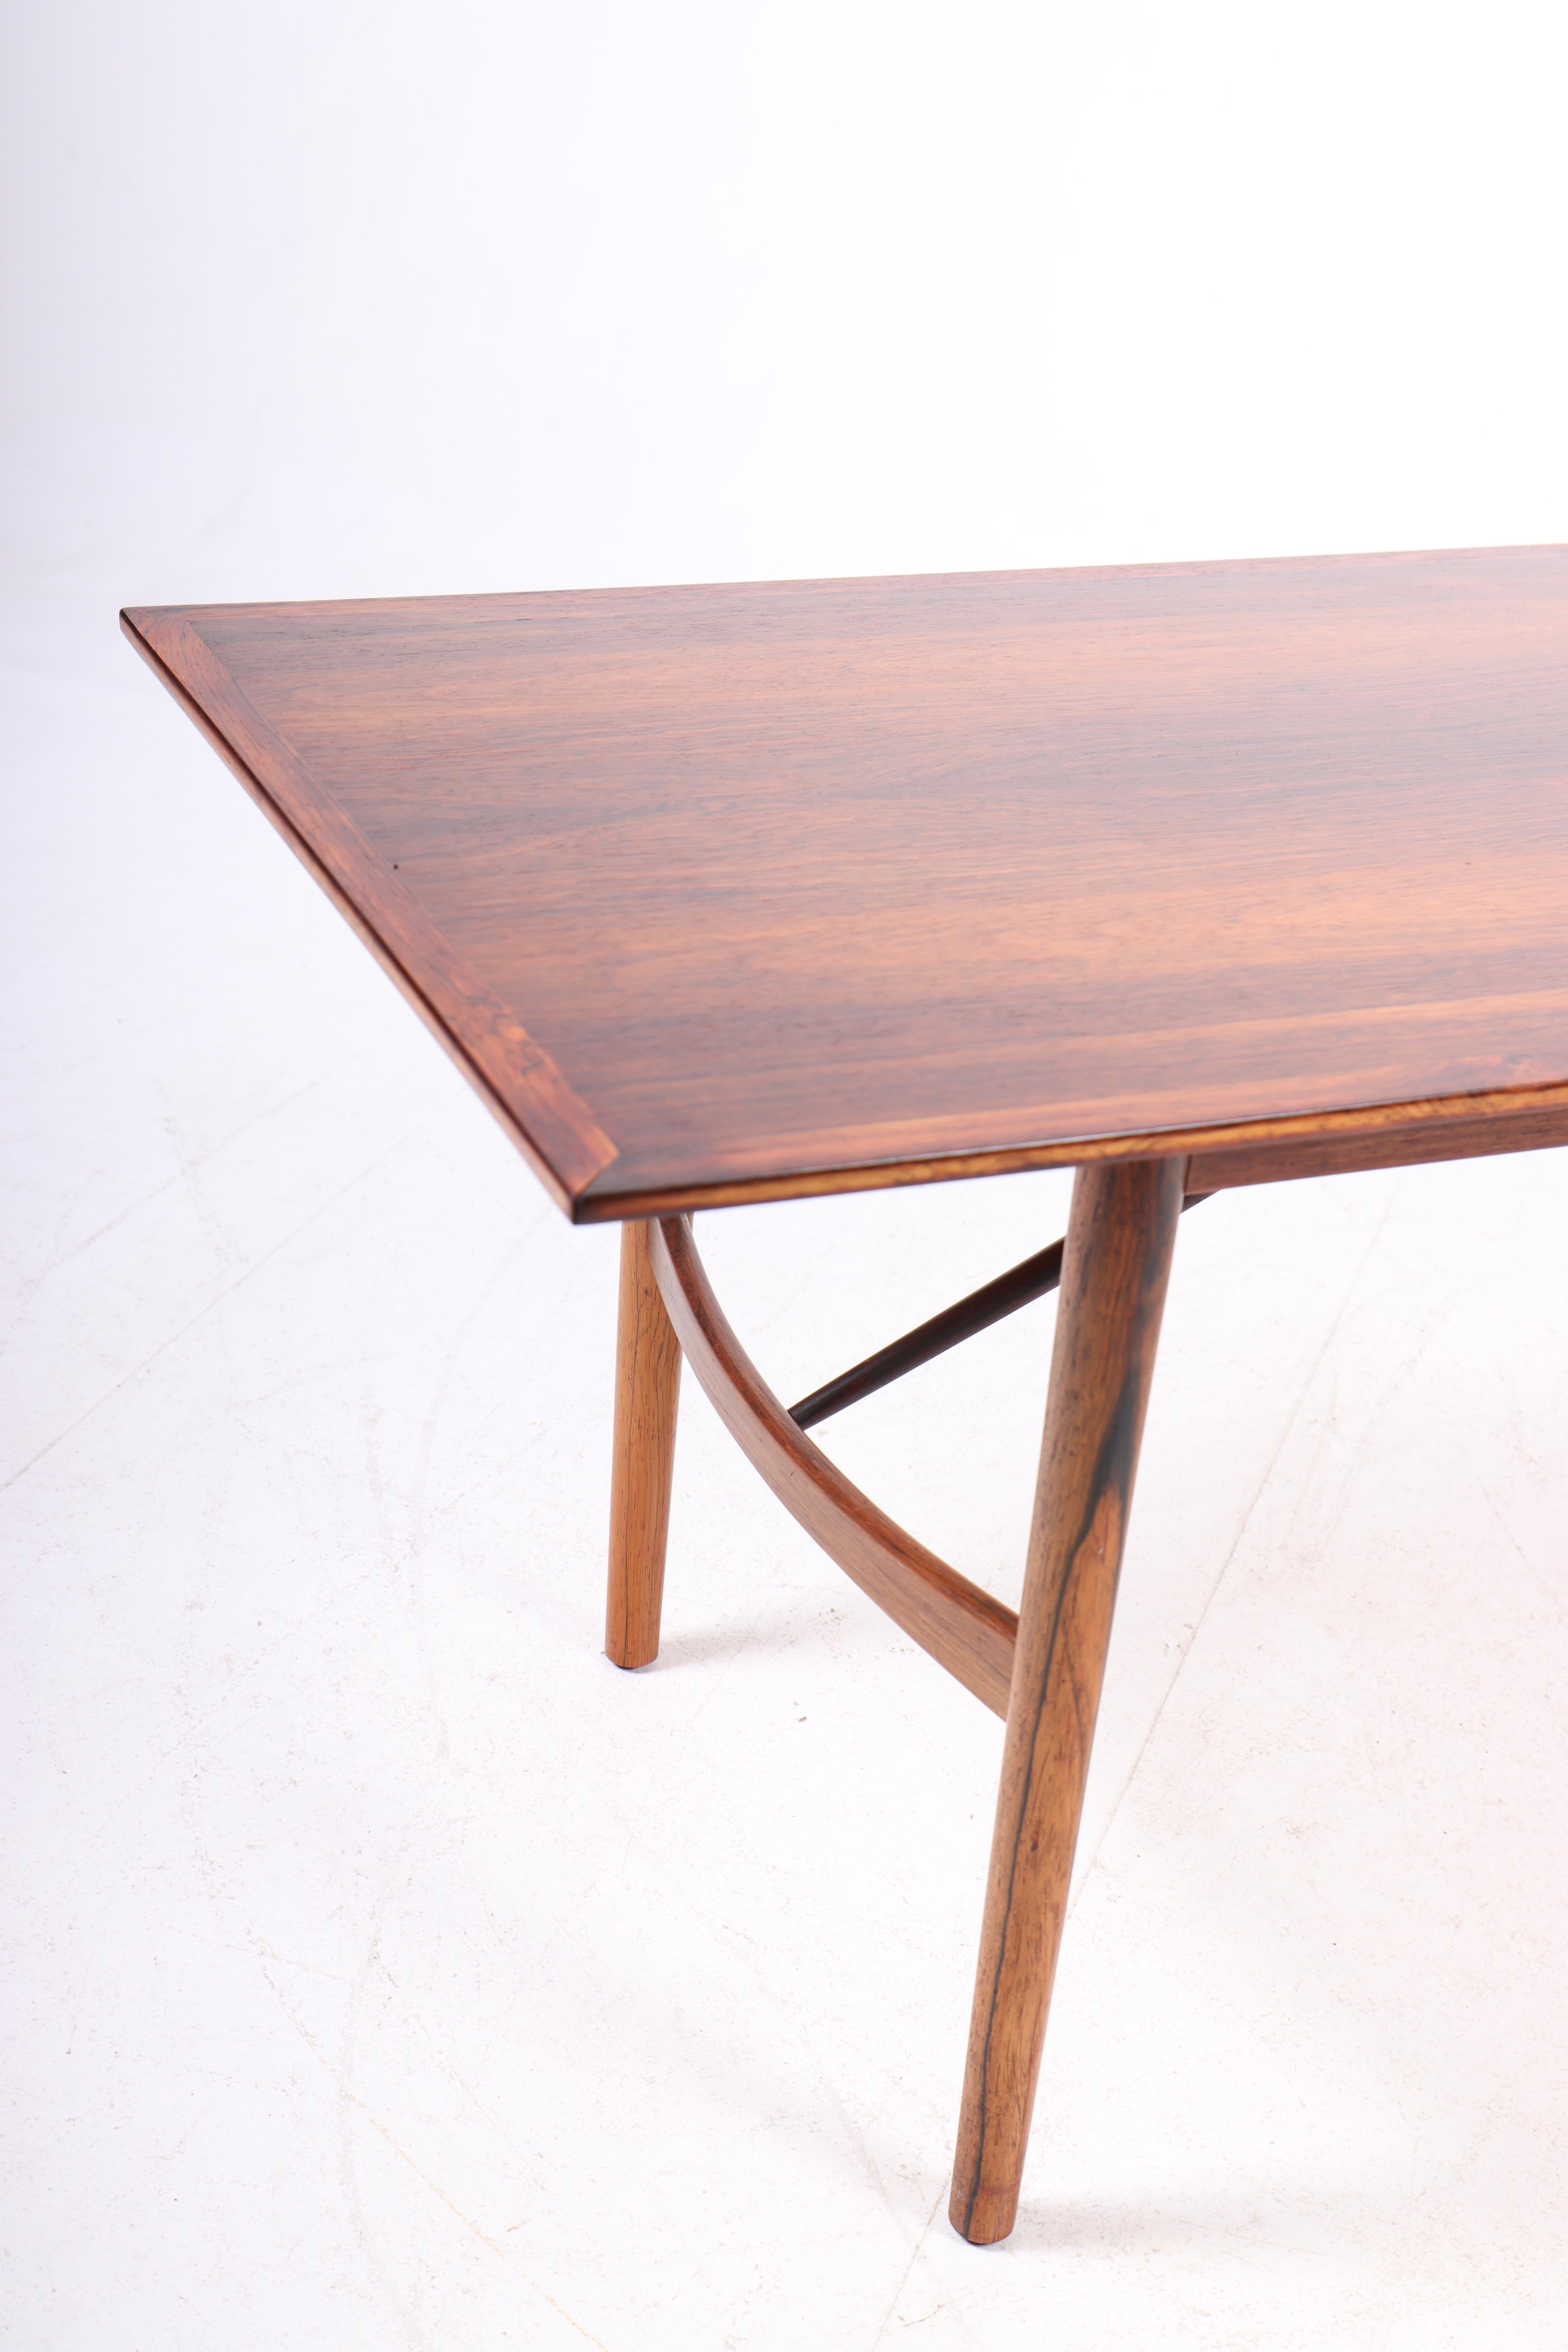 Danish Elegant Low Table in Rosewood by Steffen Syrach Larsen, 1950s For Sale